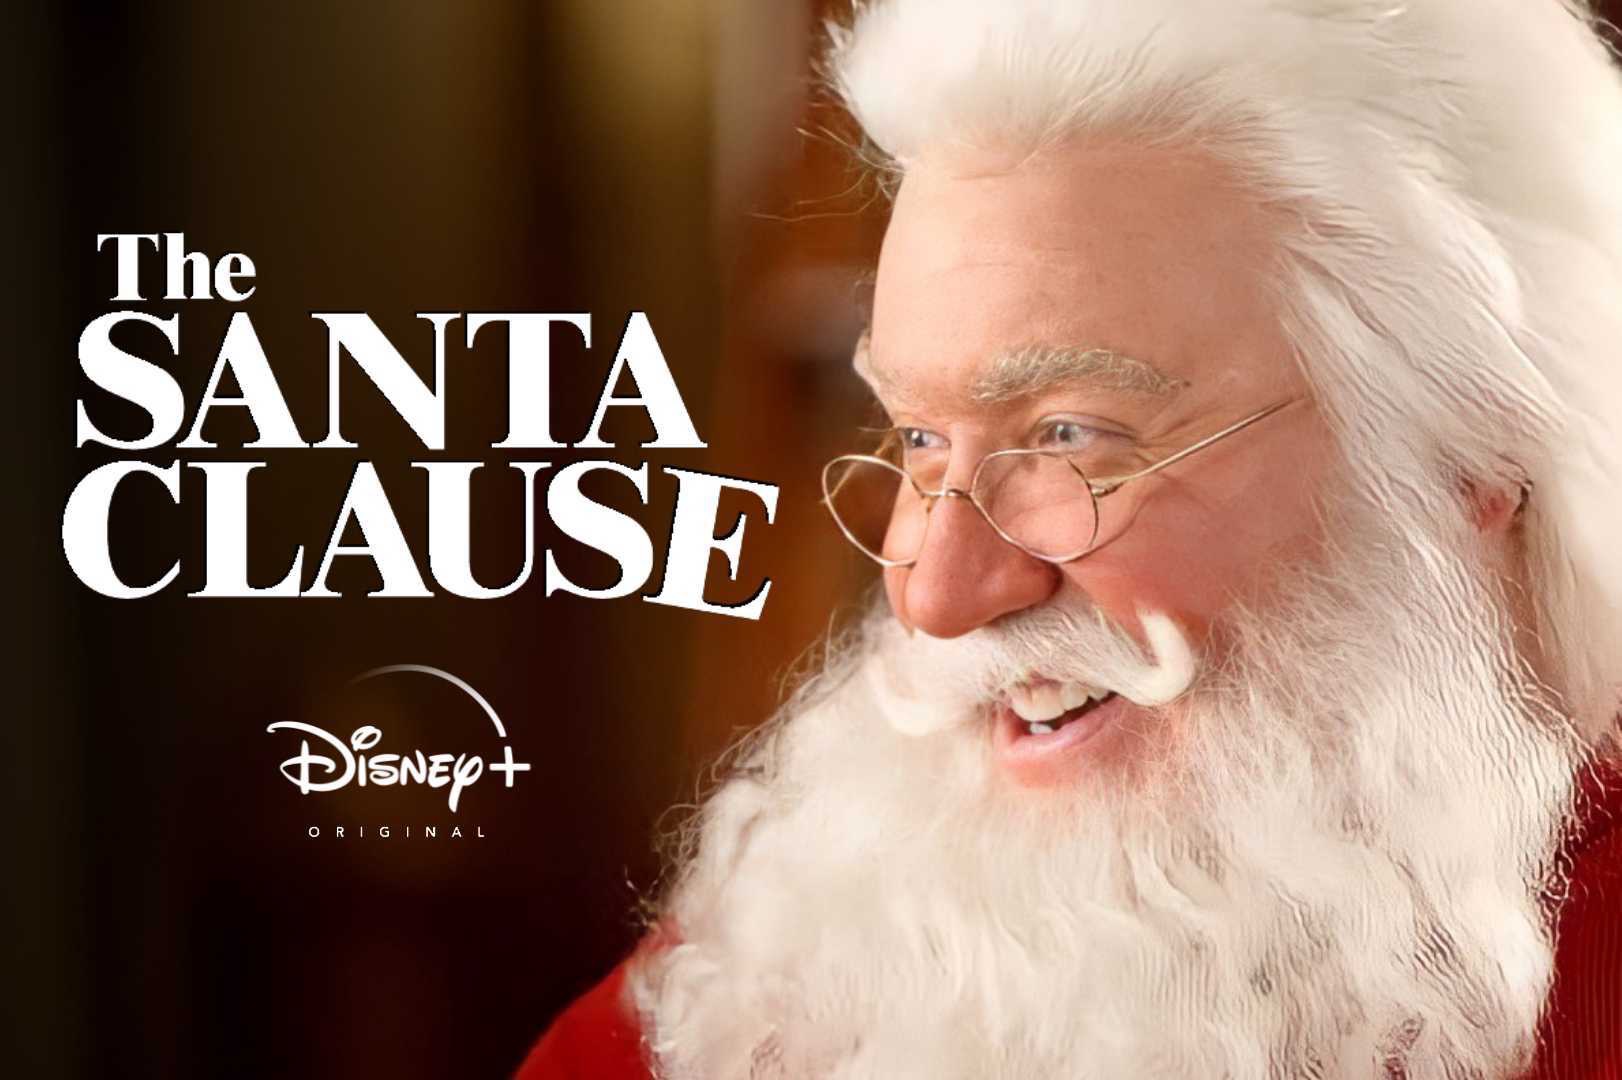 EXCLUSIVE: Disney’s ‘The Santa Clause’ Sequel Series Gets A Title